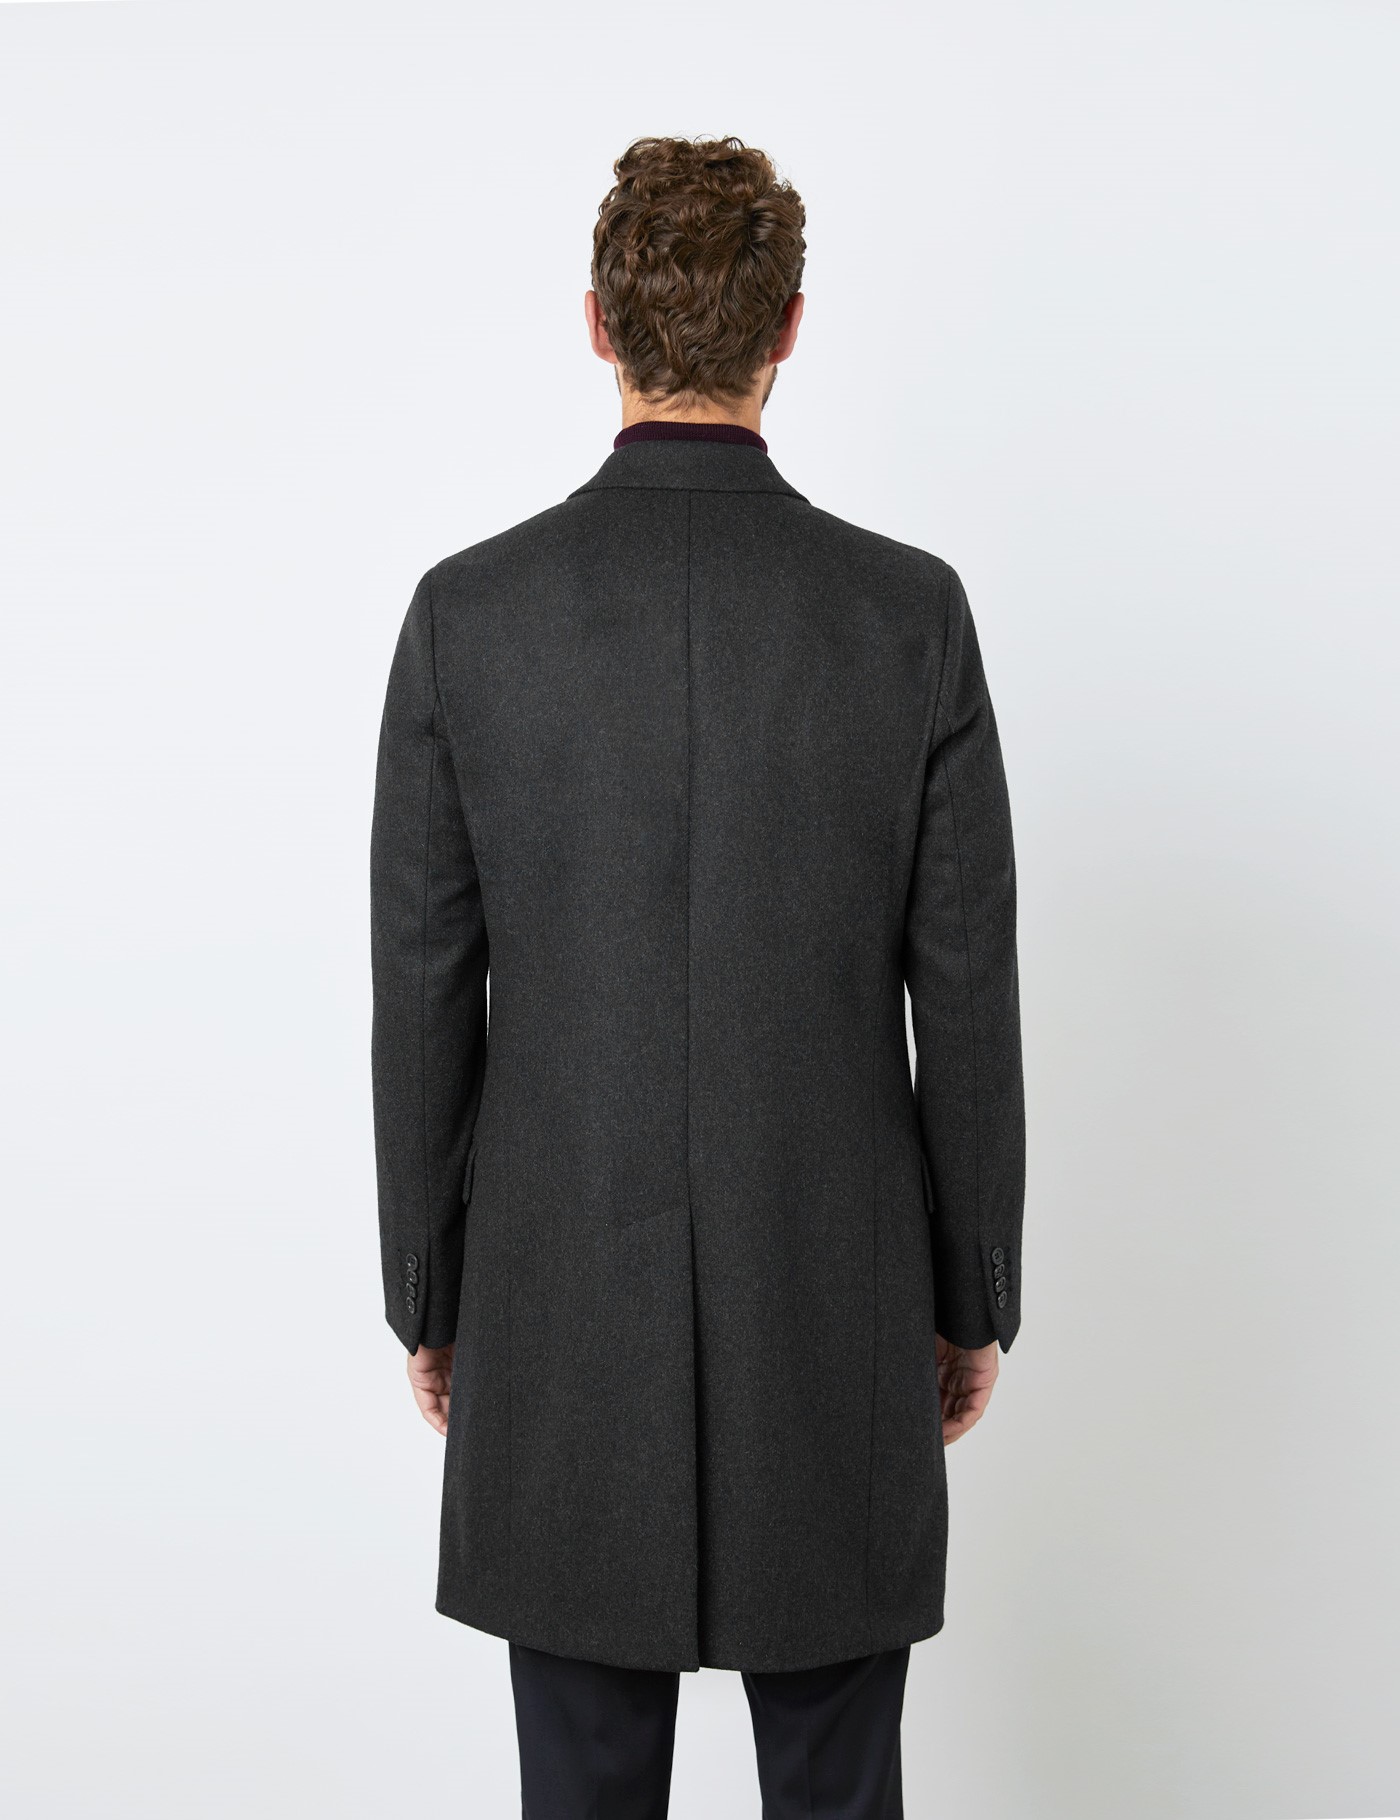 Italian Wool Men’s Coat with a Single Back Vent in Charcoal | Hawes ...